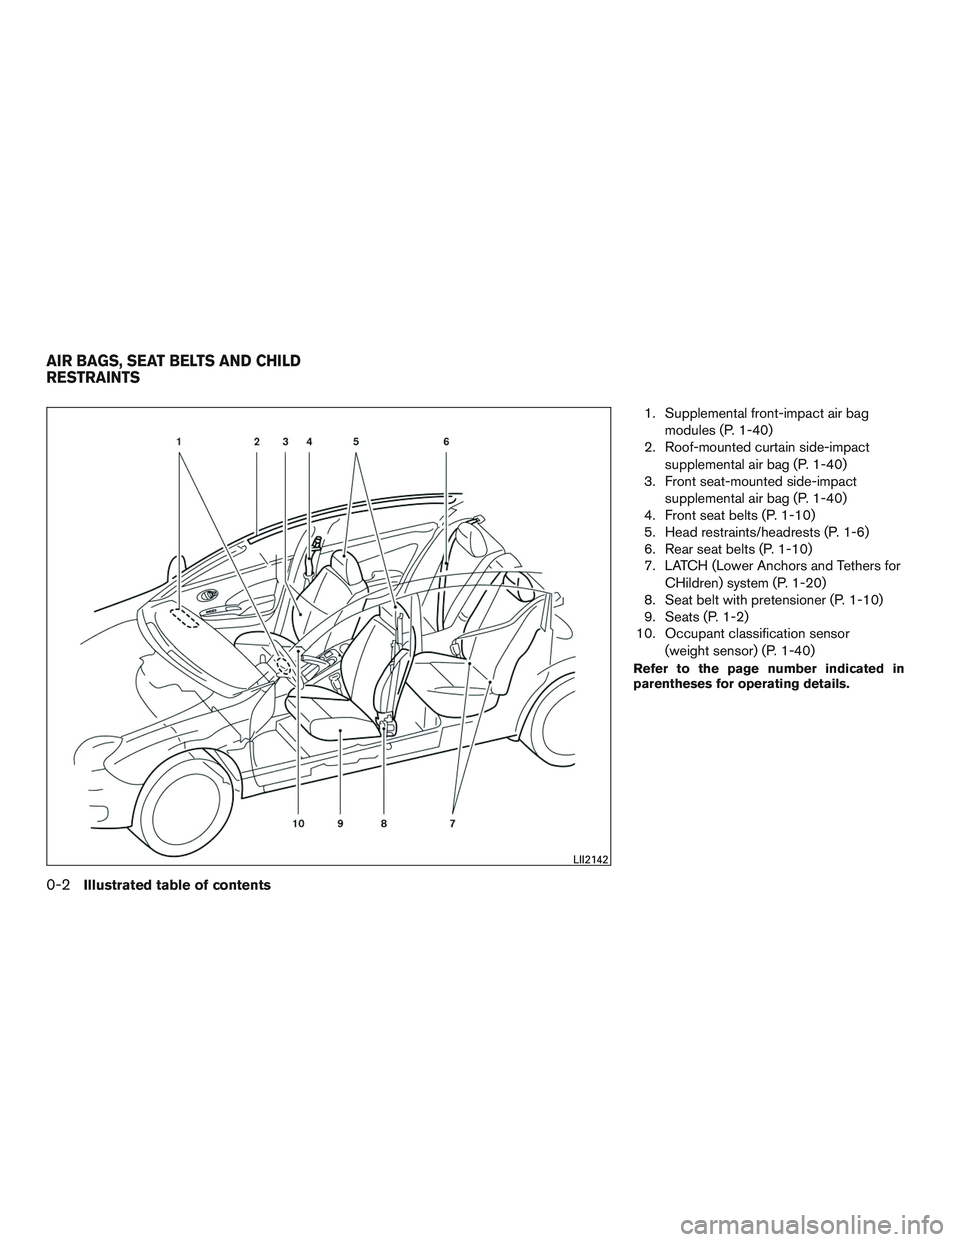 NISSAN MICRA 2015  Owner´s Manual 1. Supplemental front-impact air bagmodules (P. 1-40)
2. Roof-mounted curtain side-impact
supplemental air bag (P. 1-40)
3. Front seat-mounted side-impact
supplemental air bag (P. 1-40)
4. Front seat 